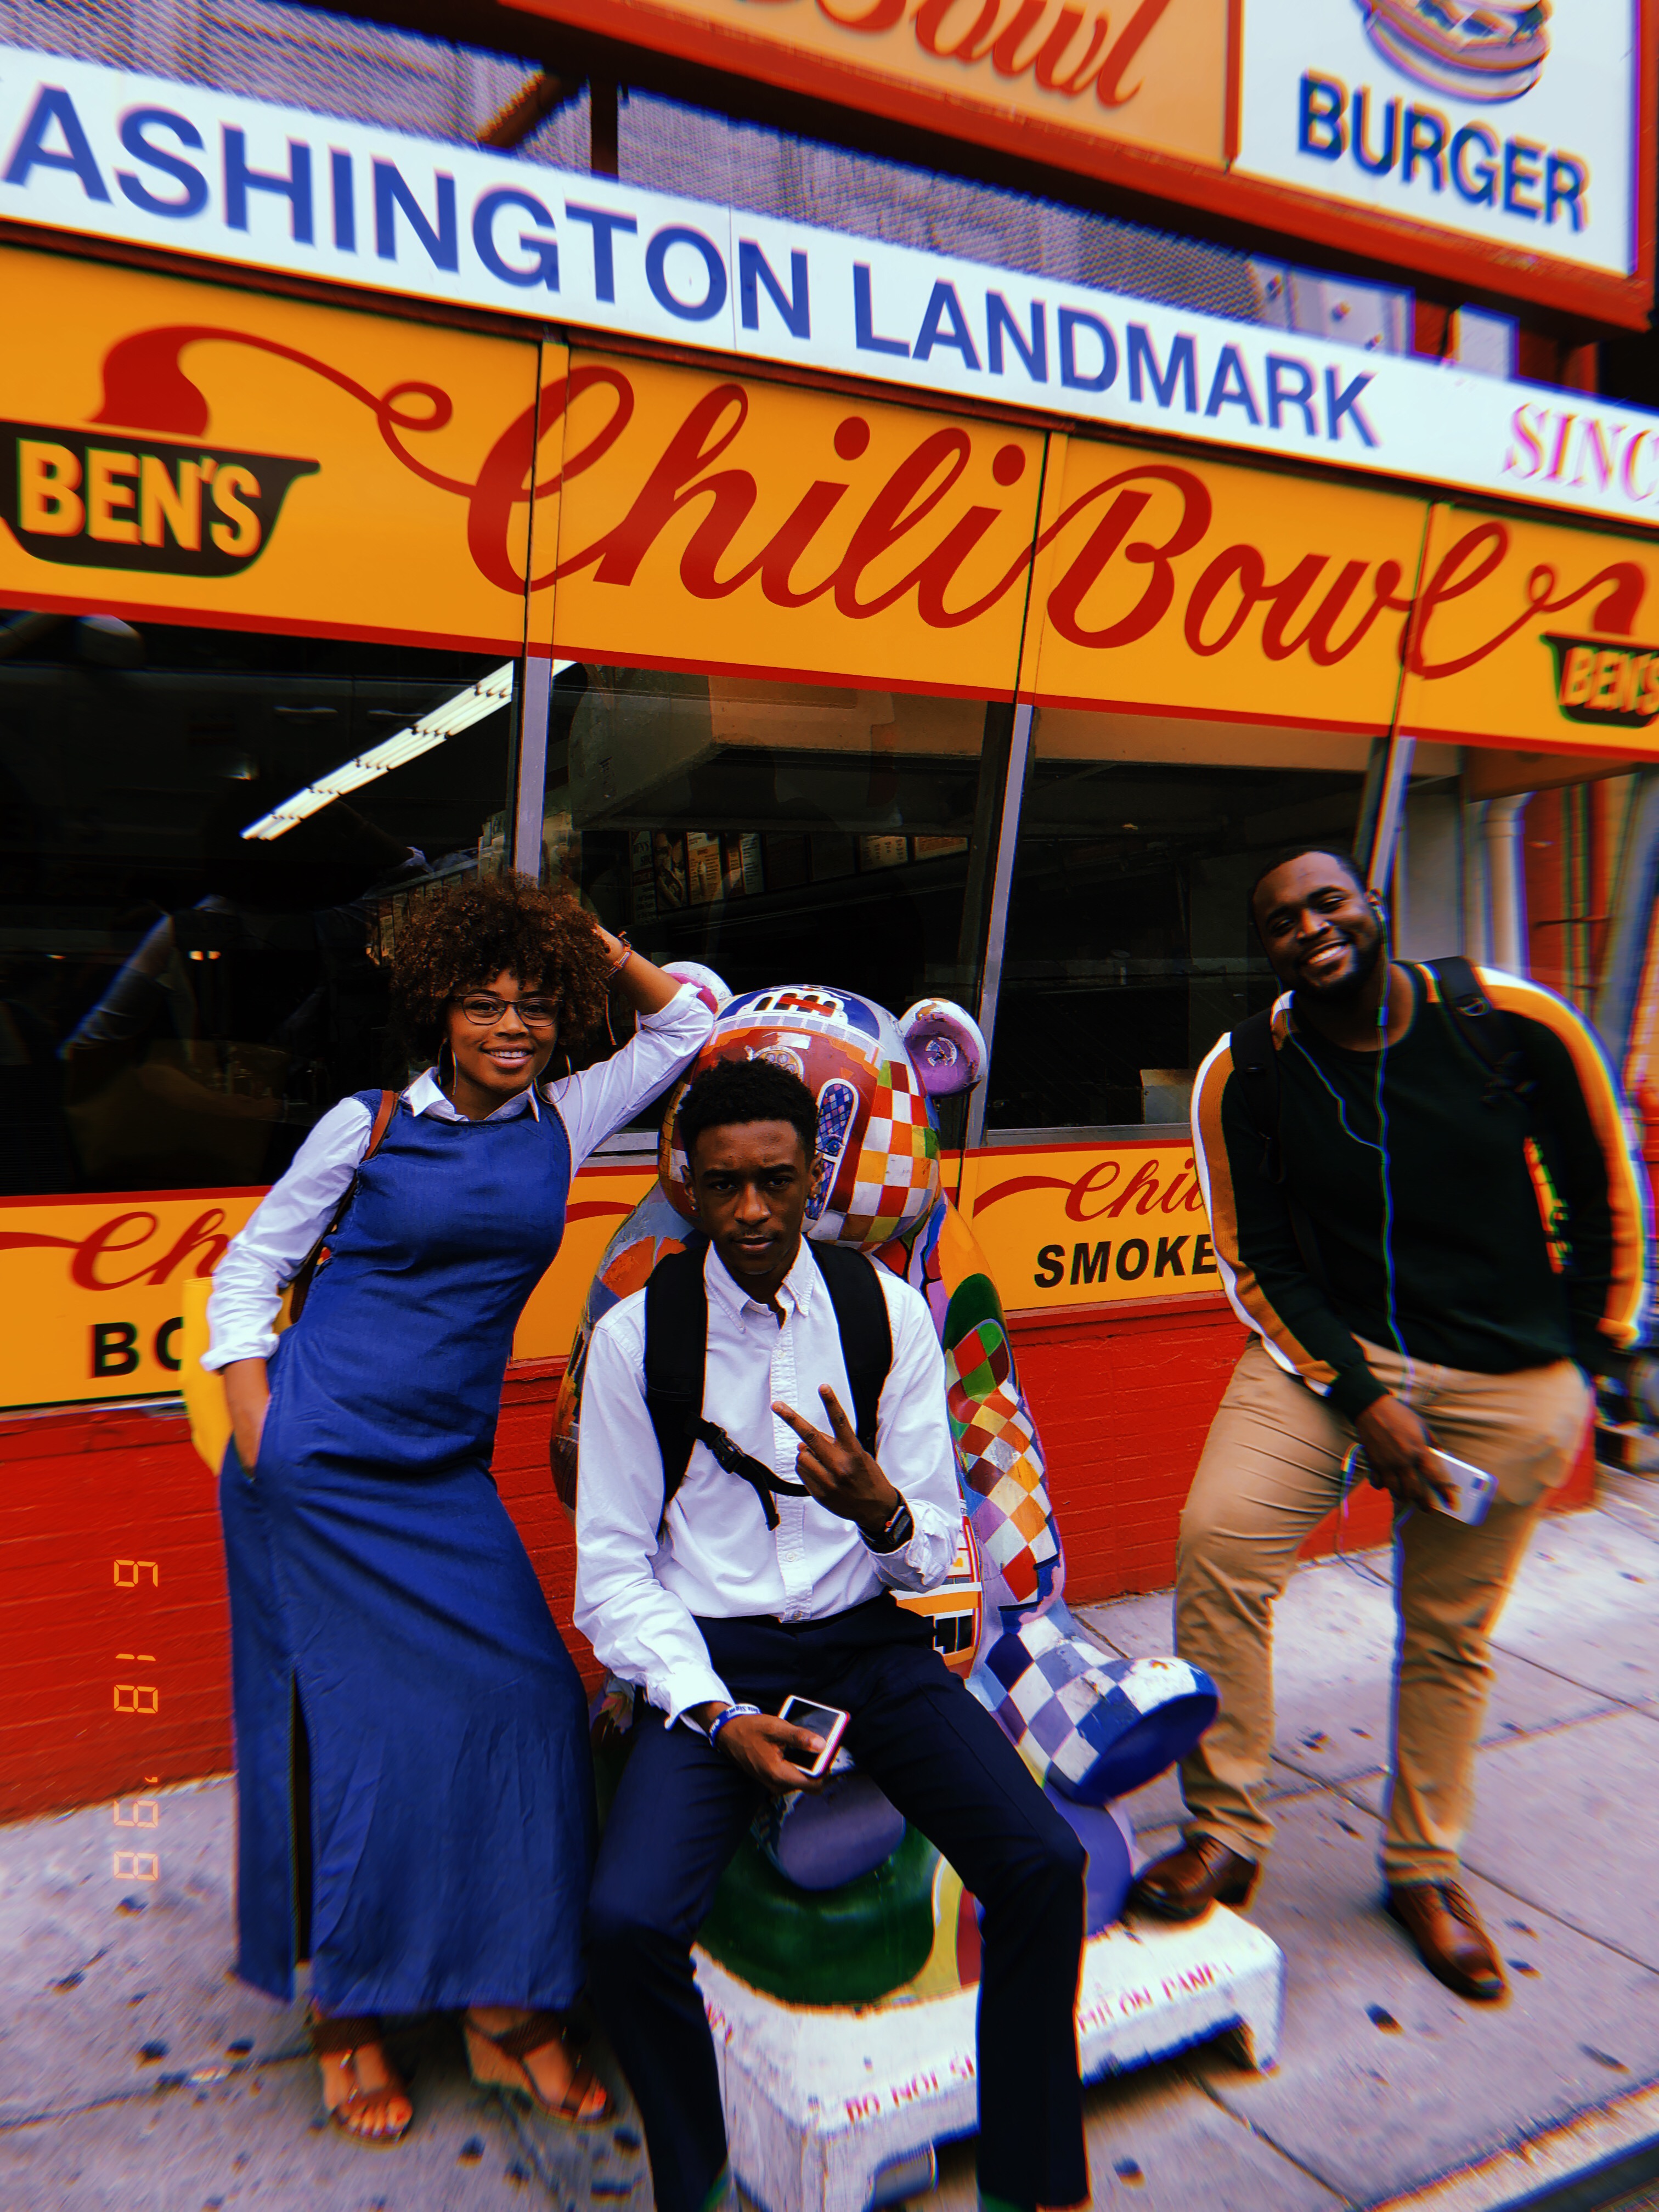 This week we visited Ben’s Chili Bowl, a Black-owned restaurant that’s been present in the city upward for more than 60 years. We also traveled to the White House and were surprised by all the demonstrations we saw. 